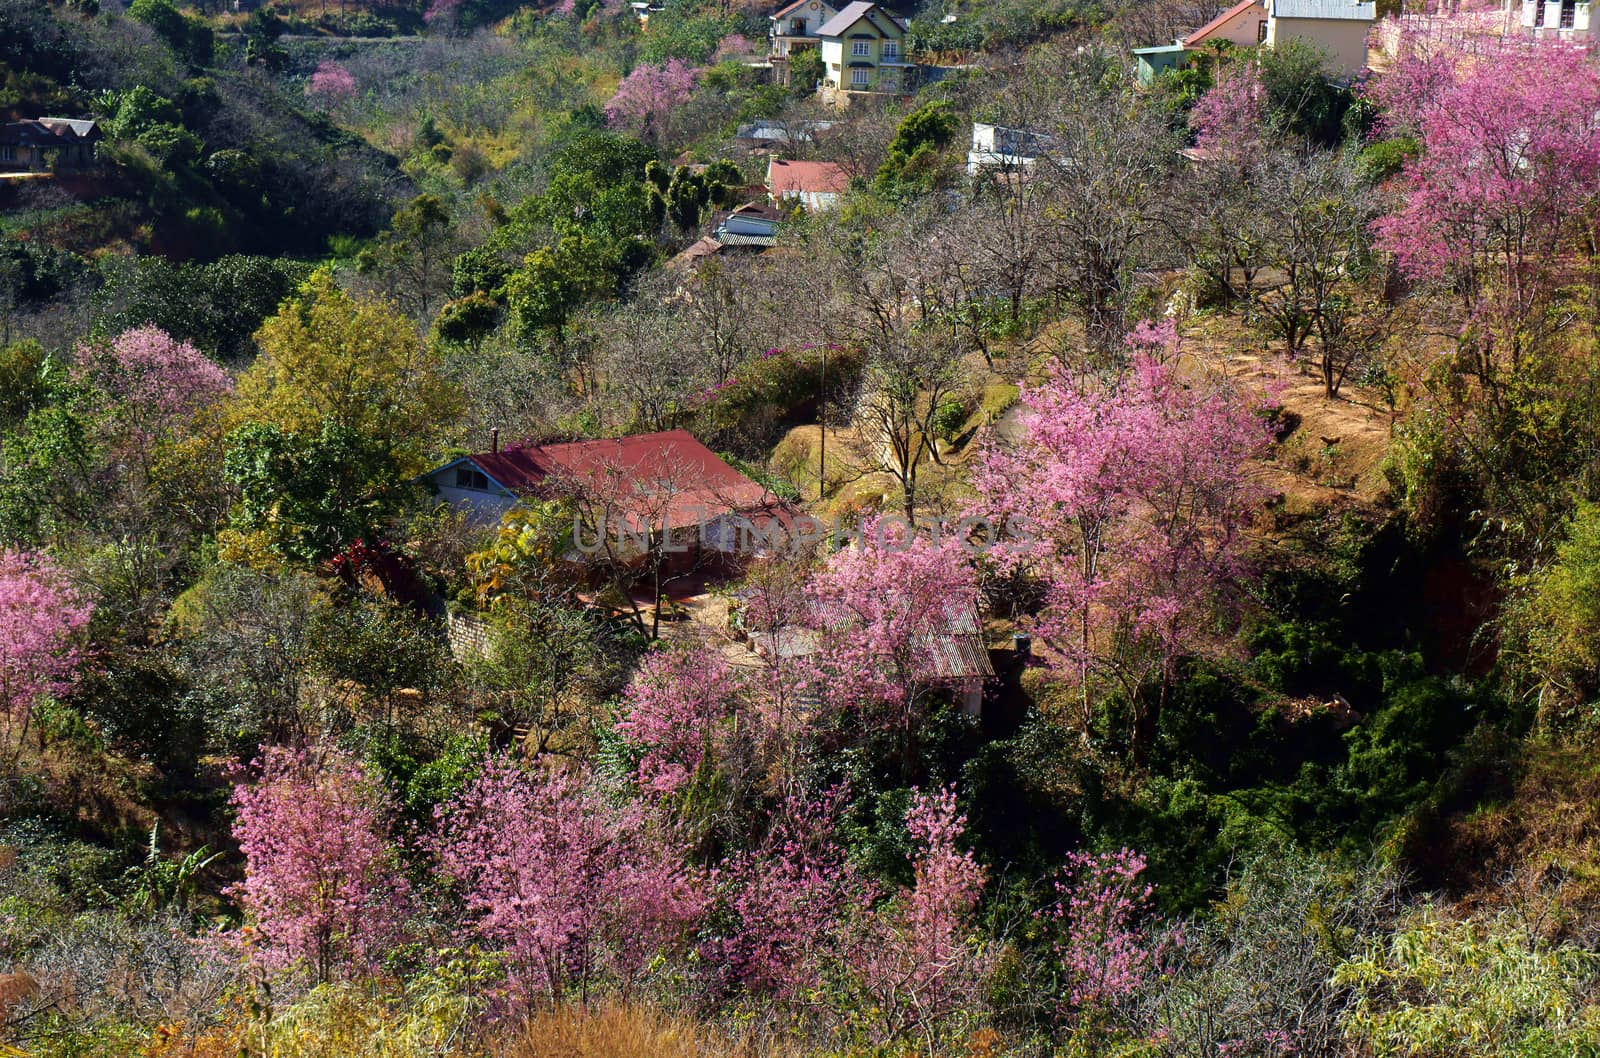 At spring times, a typical flower of Dalat city ( flower 's city) is cherry blossom will blow, a valley filled with pink flower, that's beautiful, romantic scenery.